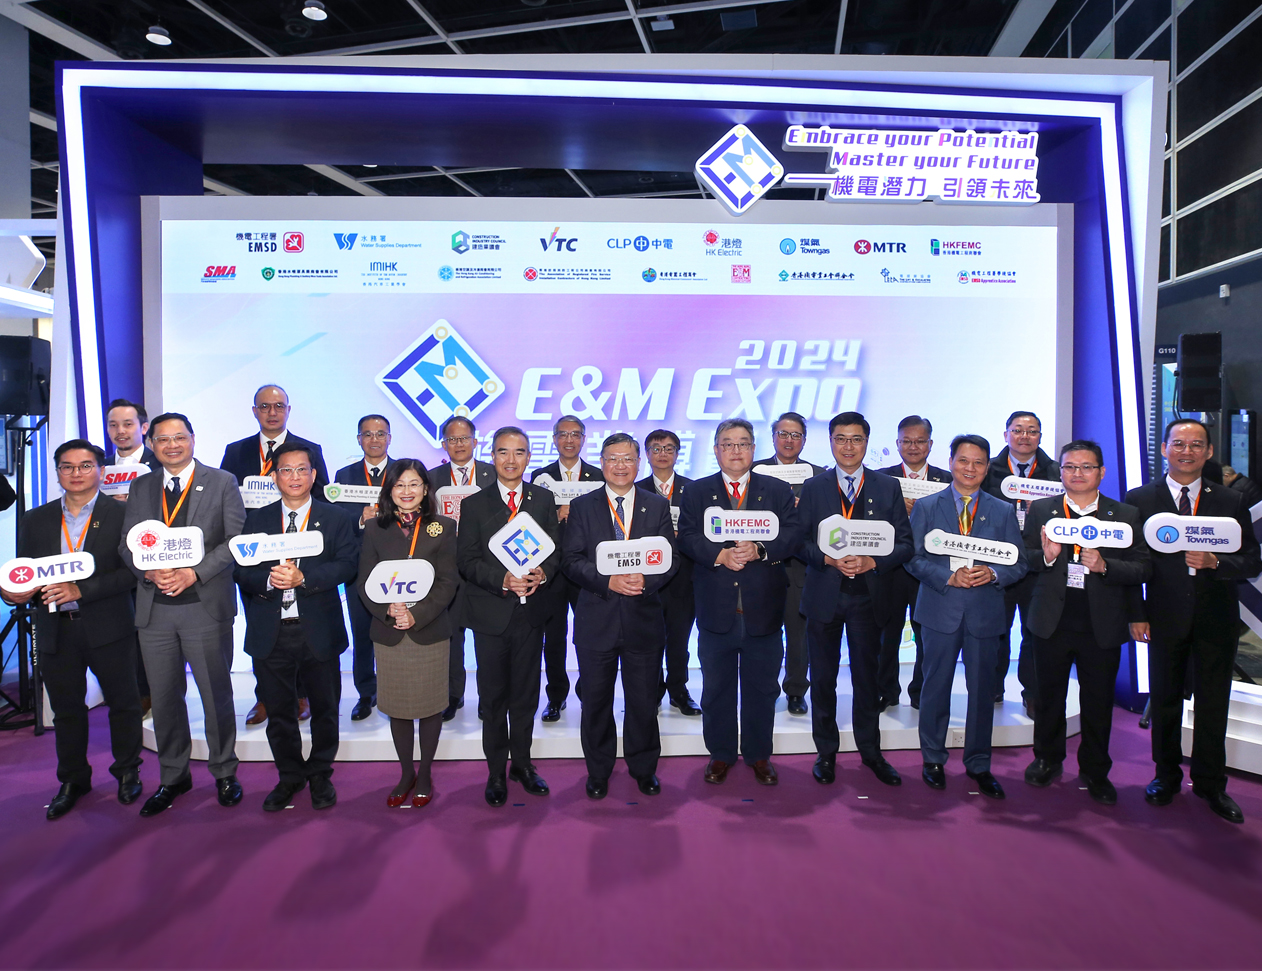 Mr Pang Yiu-hung, Director of Electrical and Mechanical Services (centre, front row), Mr Antonio Chan, Guest of Honour and Chairman of the Hong Kong Federation of Electrical and Mechanical Contractors Limited (5th left, front row), and other organisation representatives of the Working Group attended the E&M Expo to show their support.